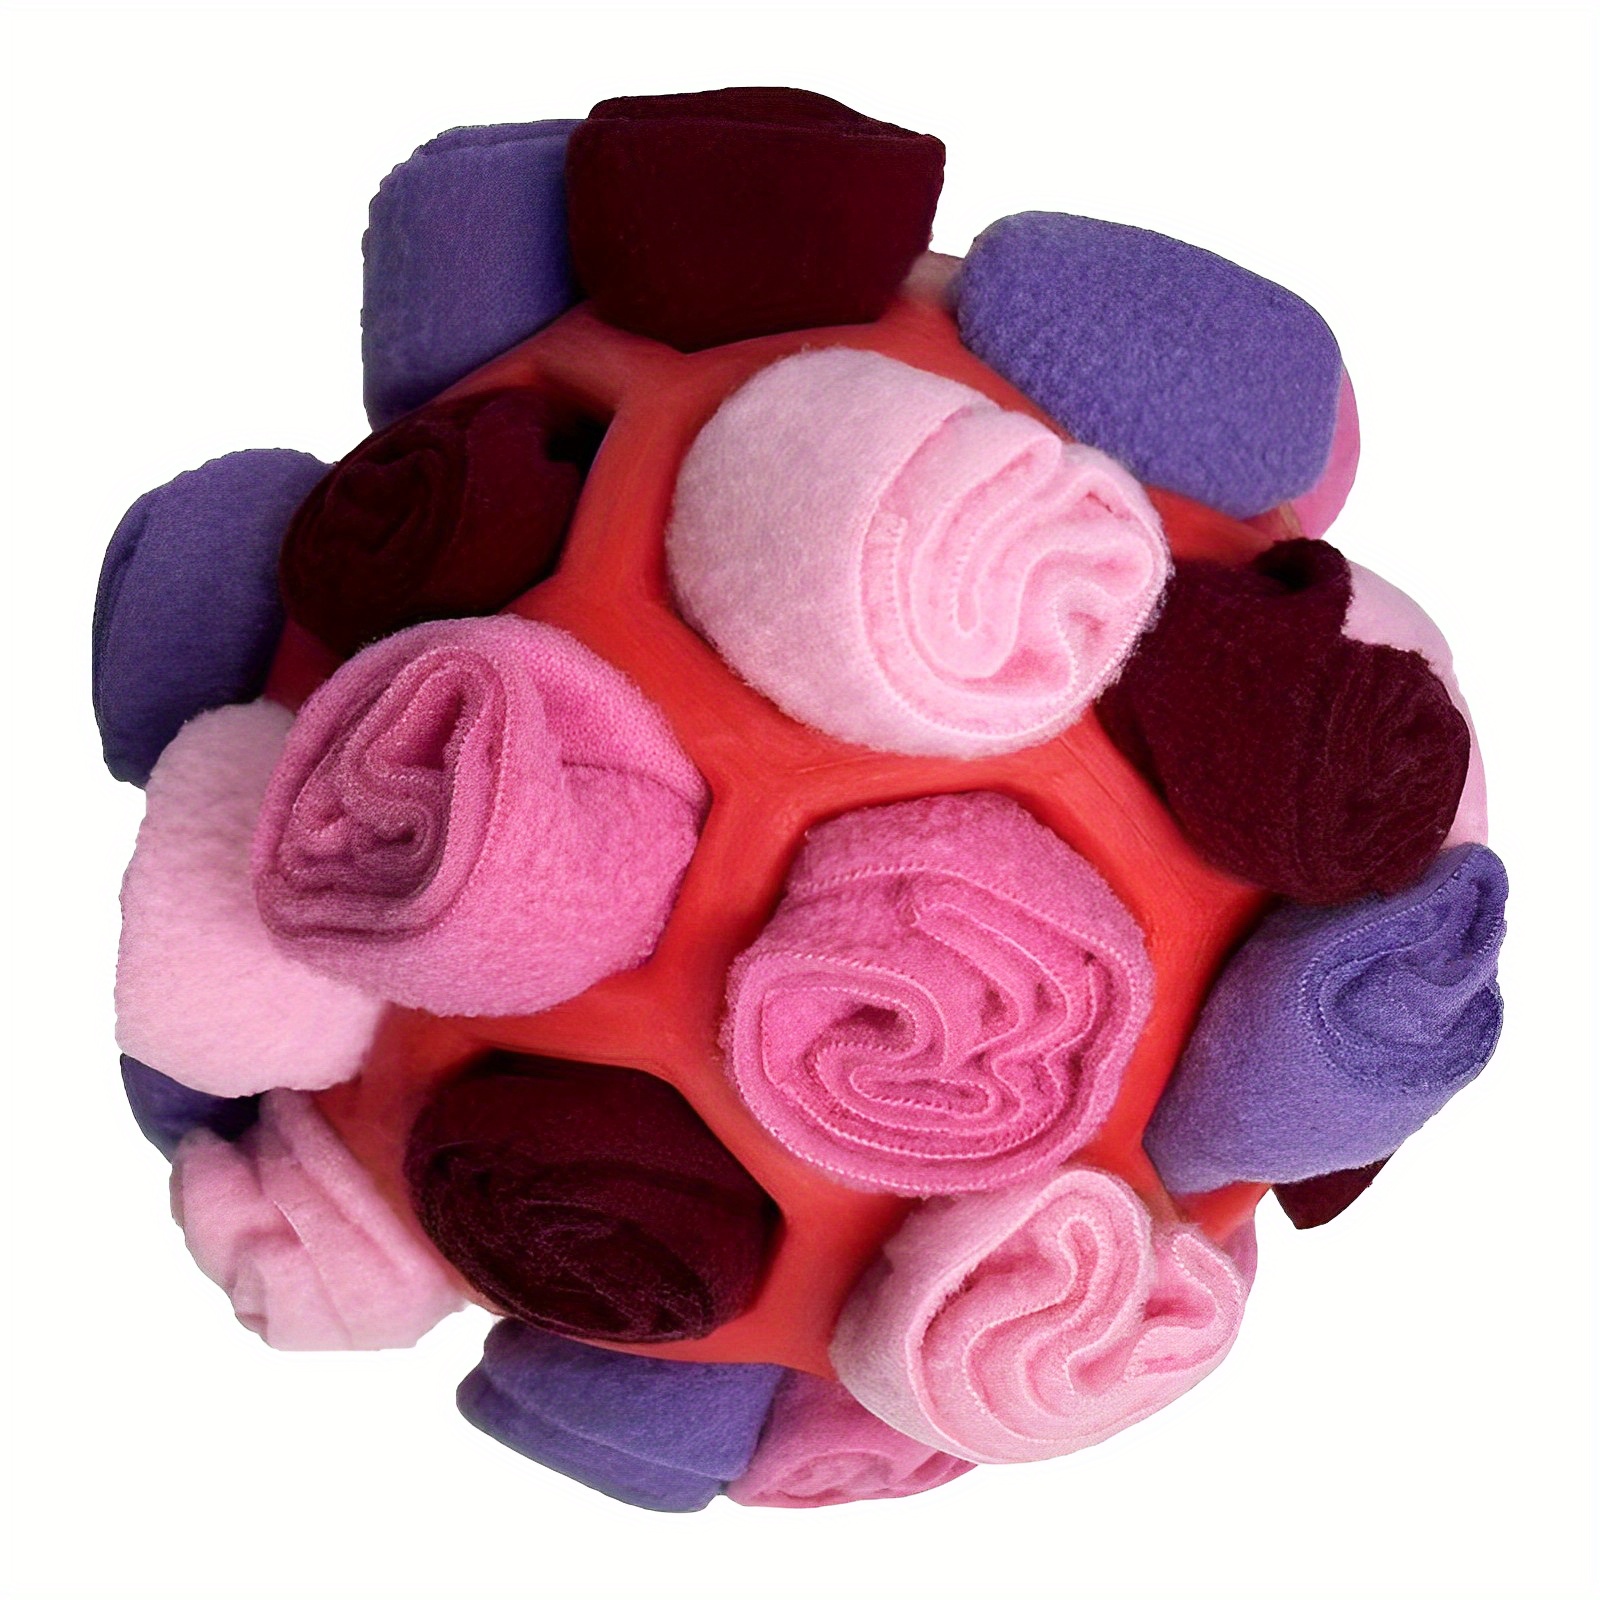 Pupper Snuffle Ball - Snuffle Ball for Dogs Pink / Small